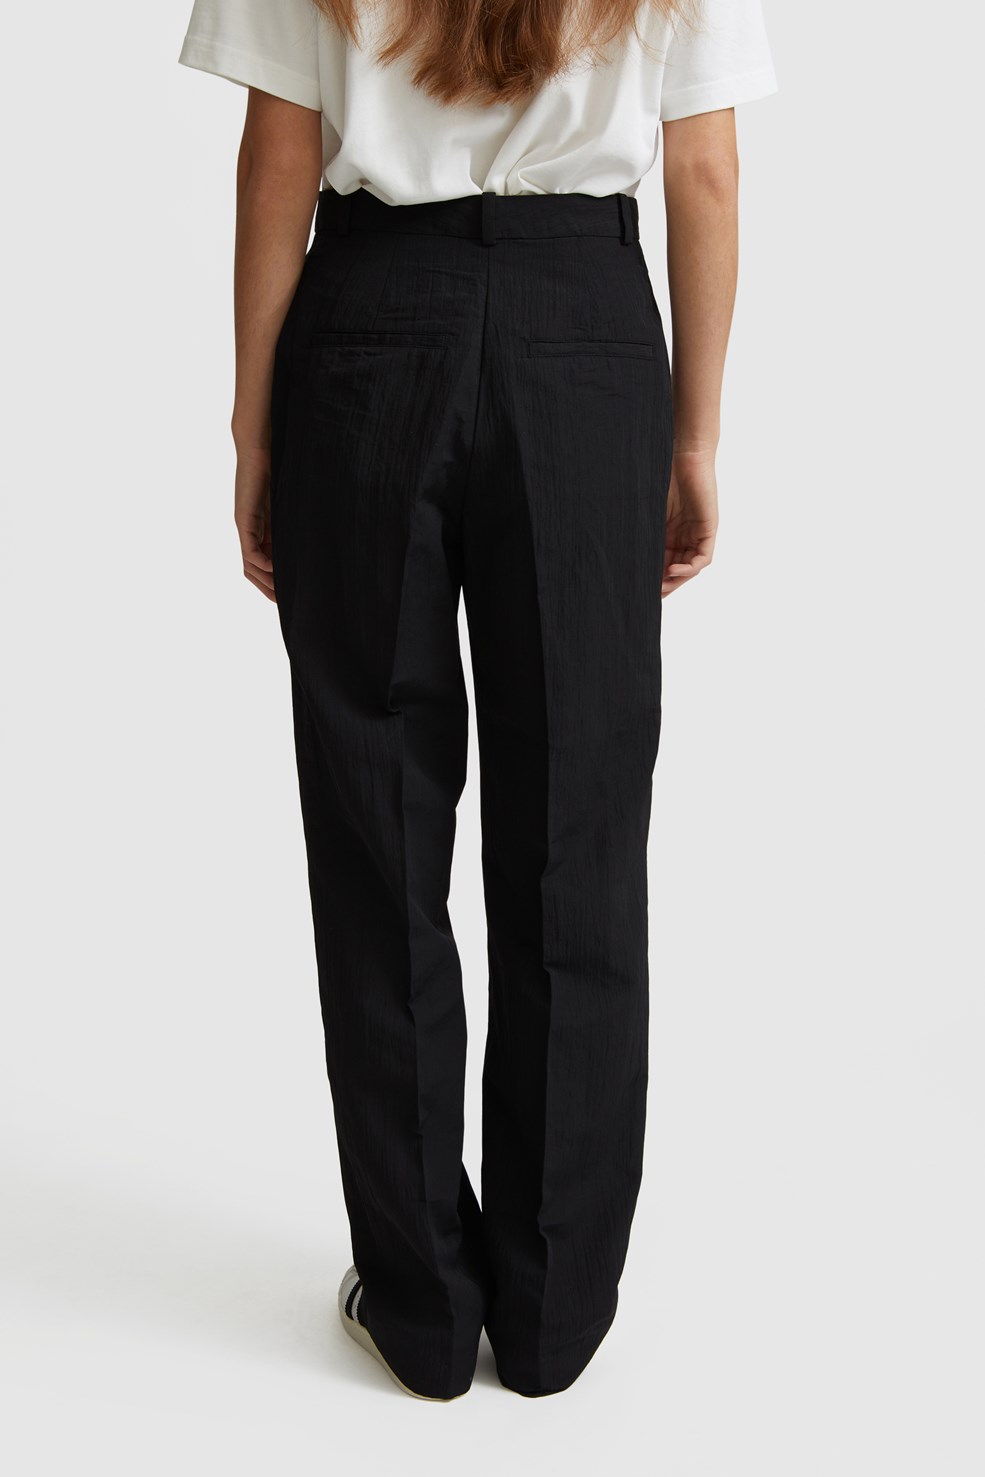 Wood Wood Evelyn structured trousers Black | WoodWood.com